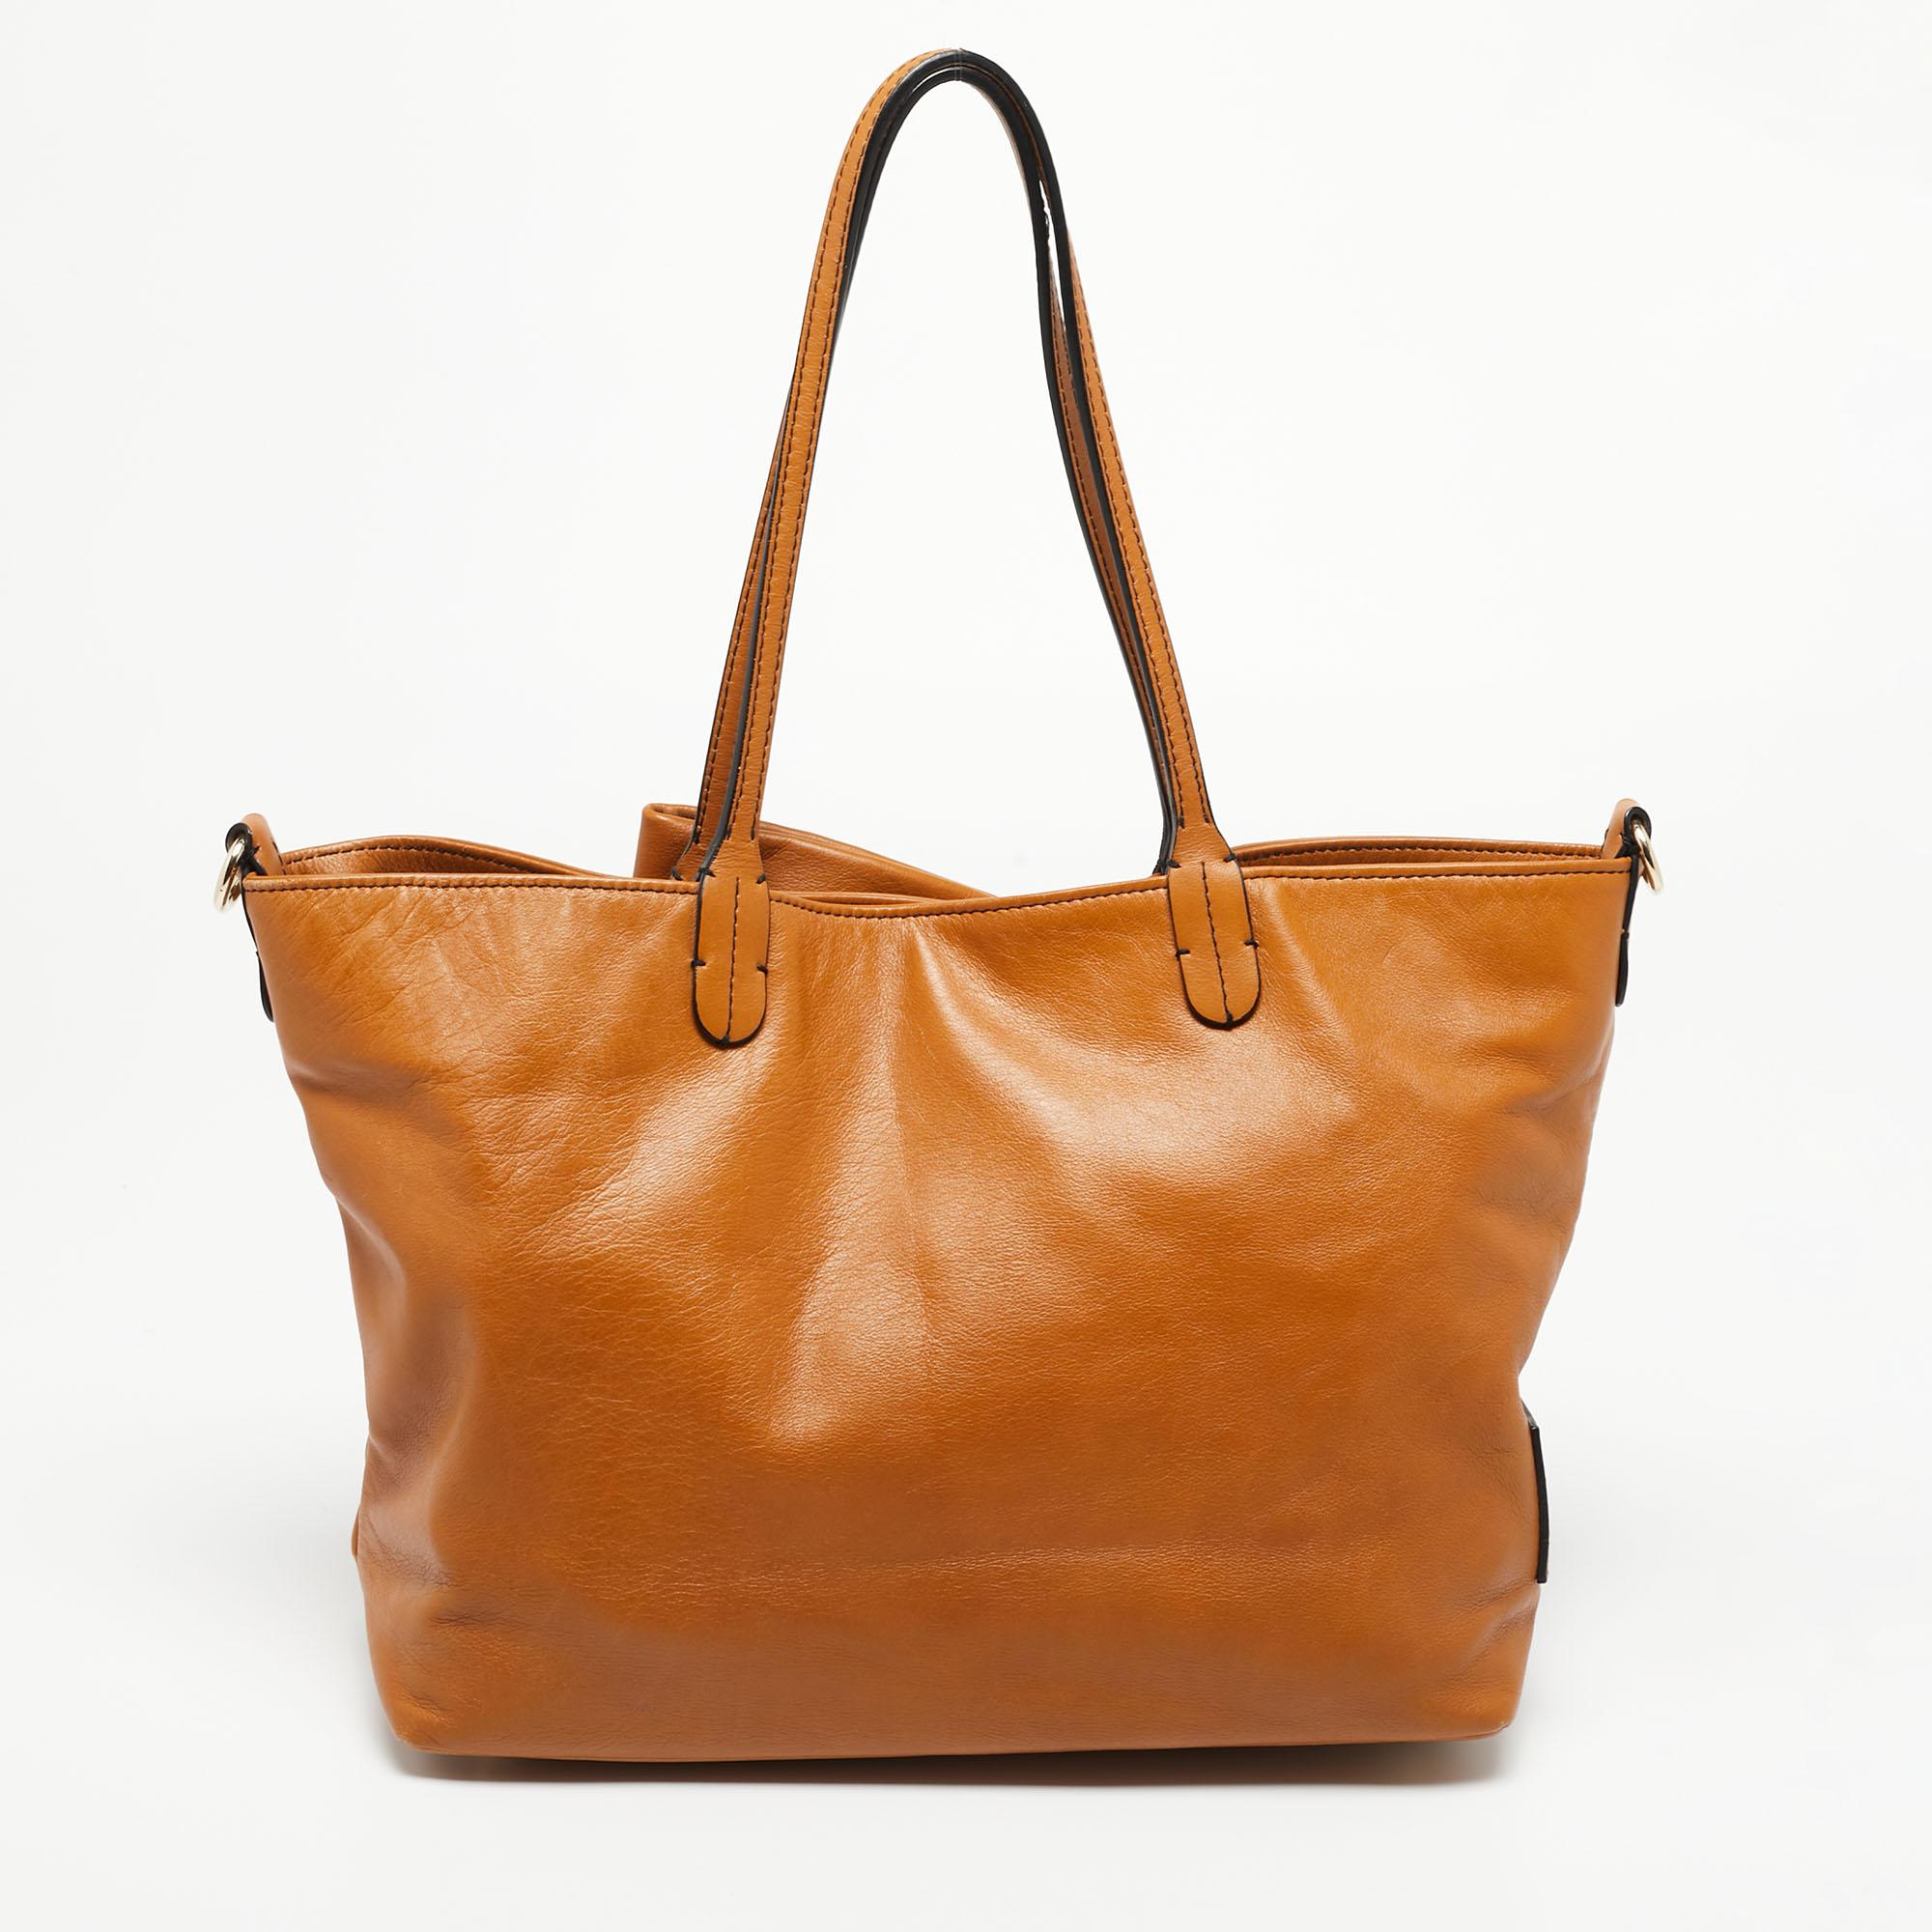 This tote from the House of Valentino is stylish, sturdy, and practical for everyday use. It is crafted using tan leather on the exterior, which is accentuated with a large bow detail on the front. It showcases two handles, gold-toned hardware, and